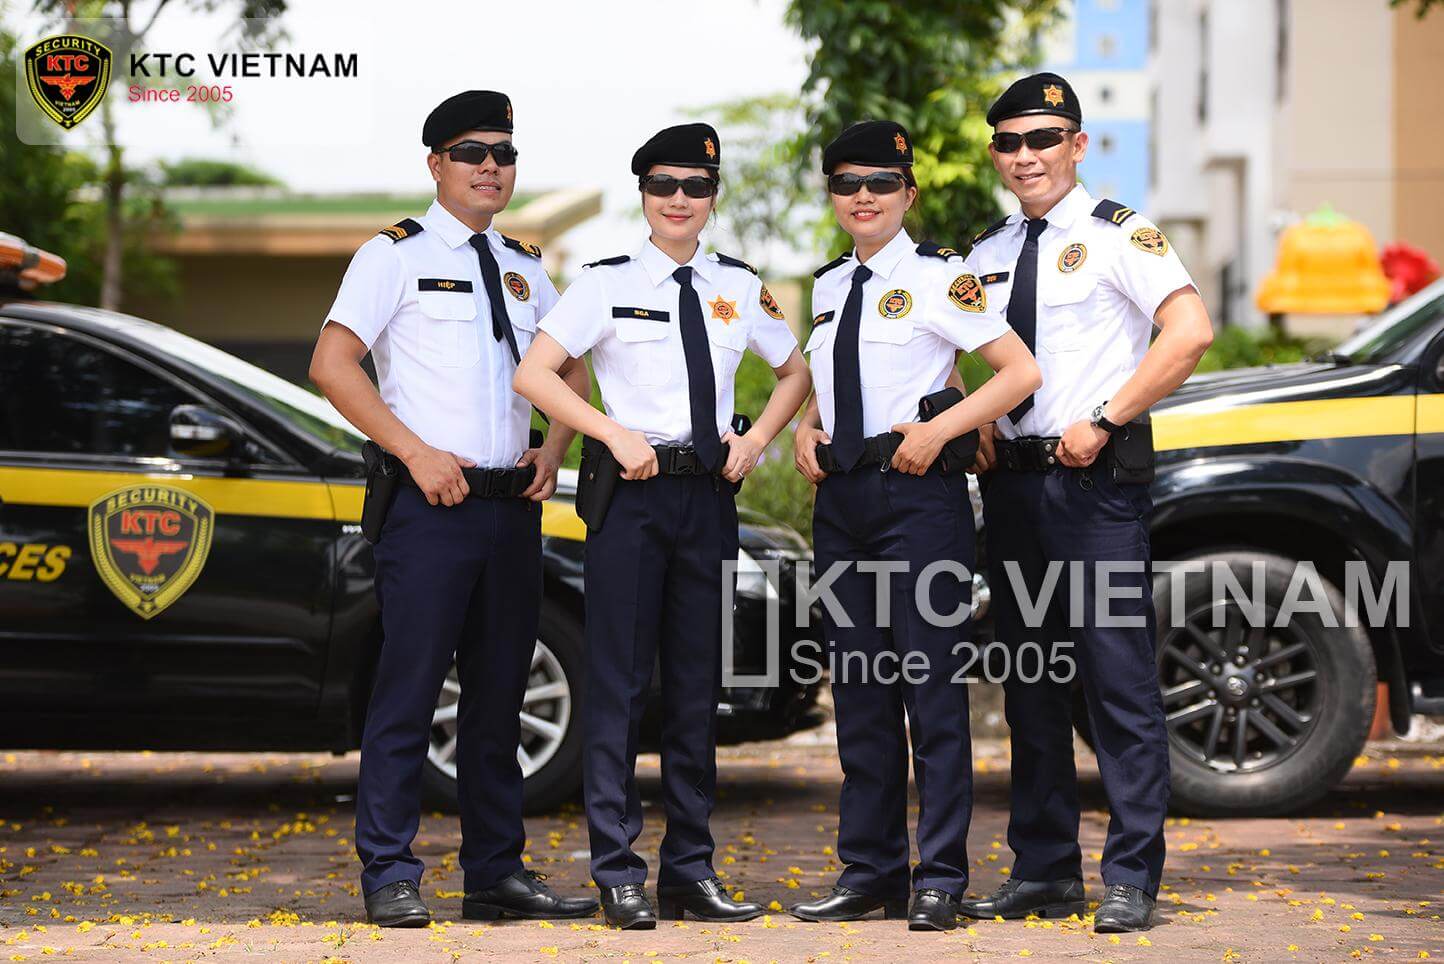 Inspector and Security Officer Recruitment